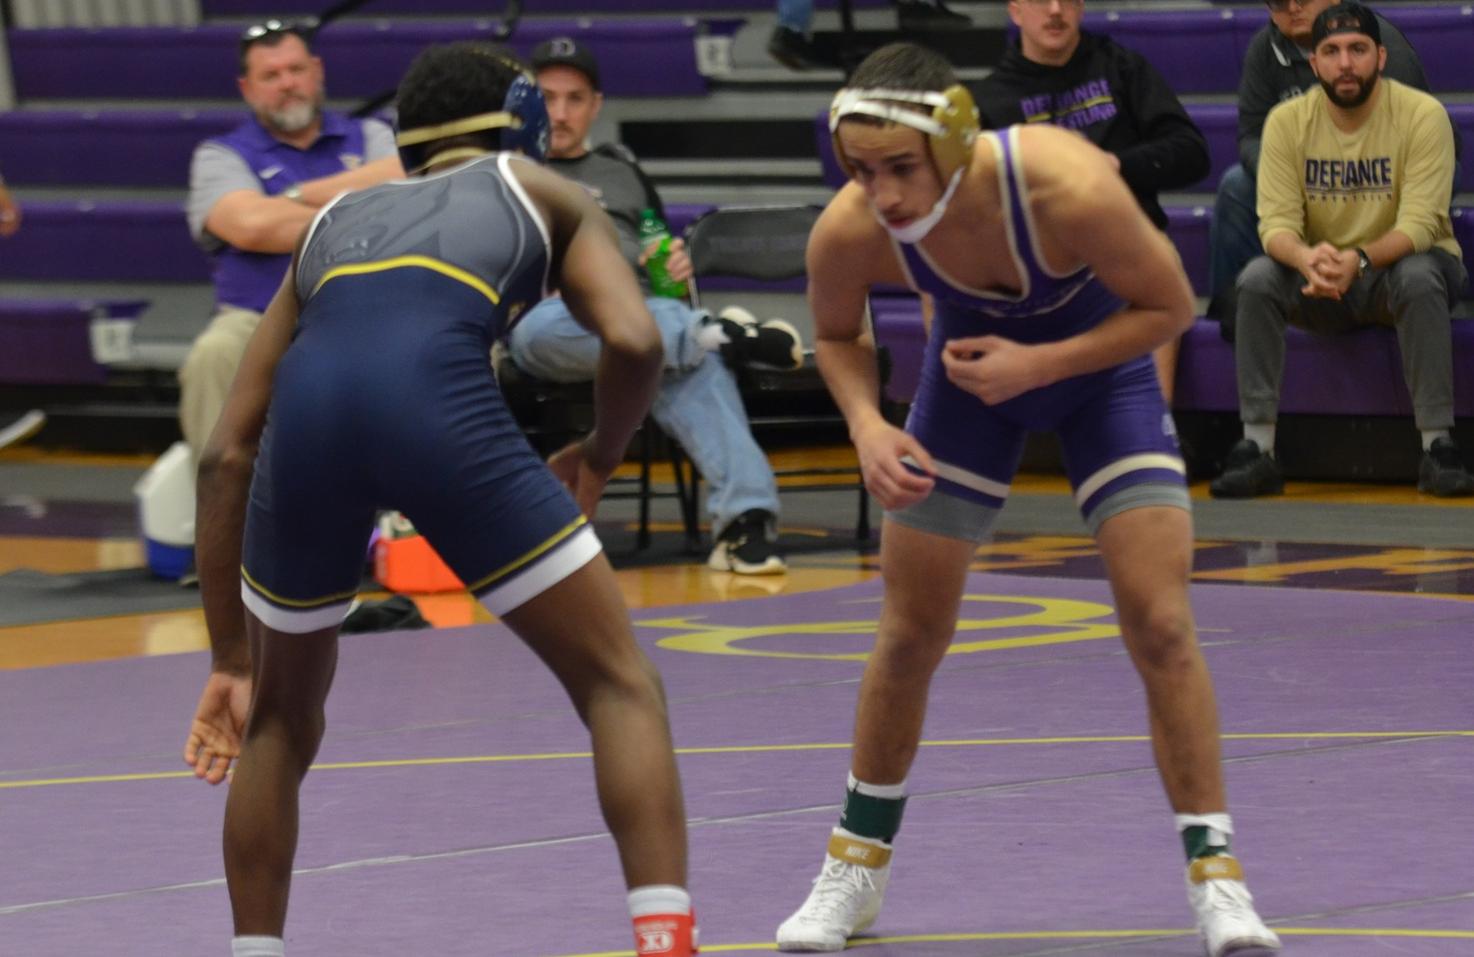 Beltran earns first place finish at Mid-States Invitational